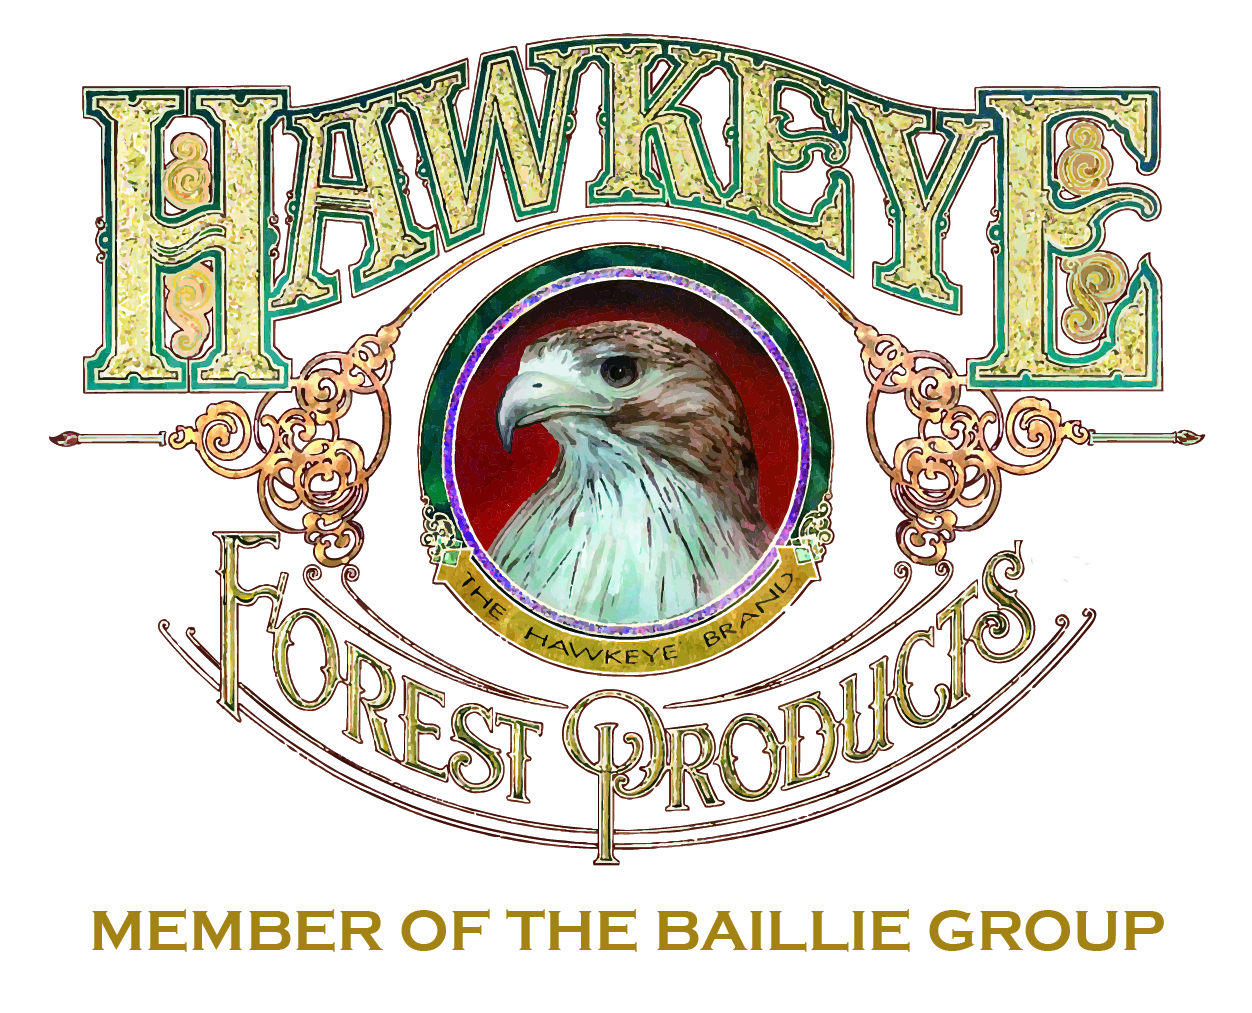 About Hawkeye Forest Hardwood